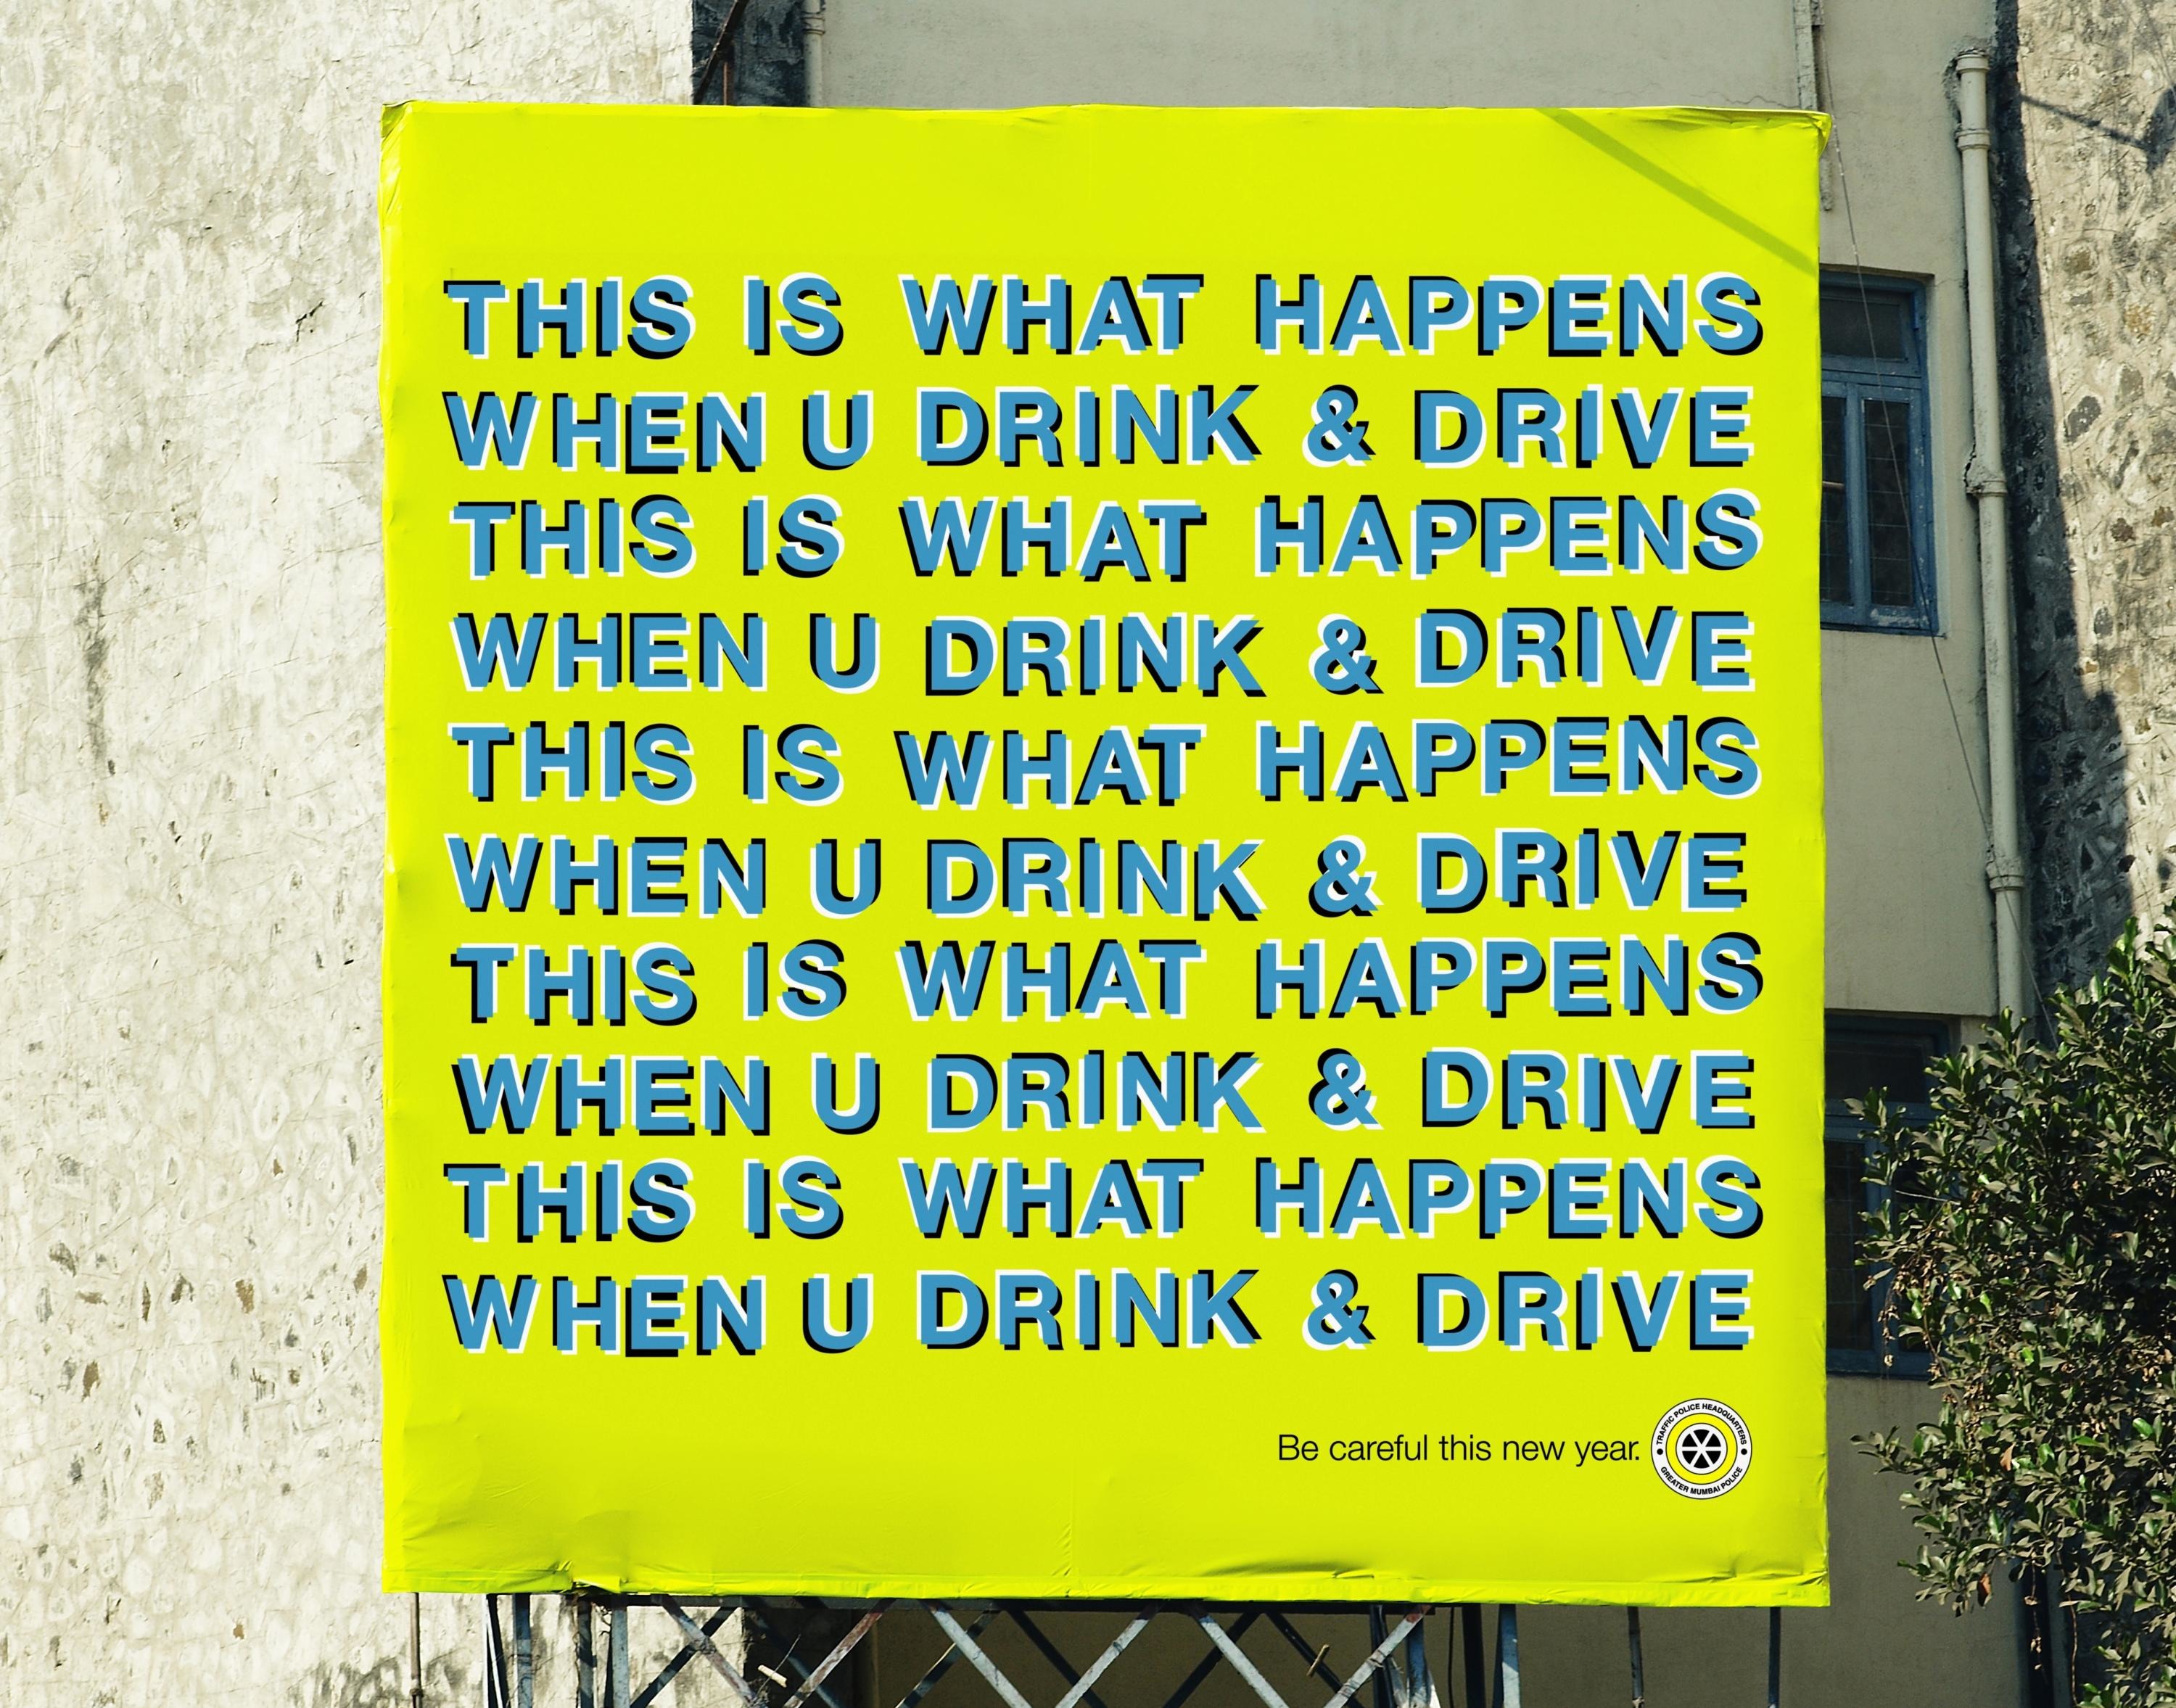 DRINK-DRIVE MESSAGE